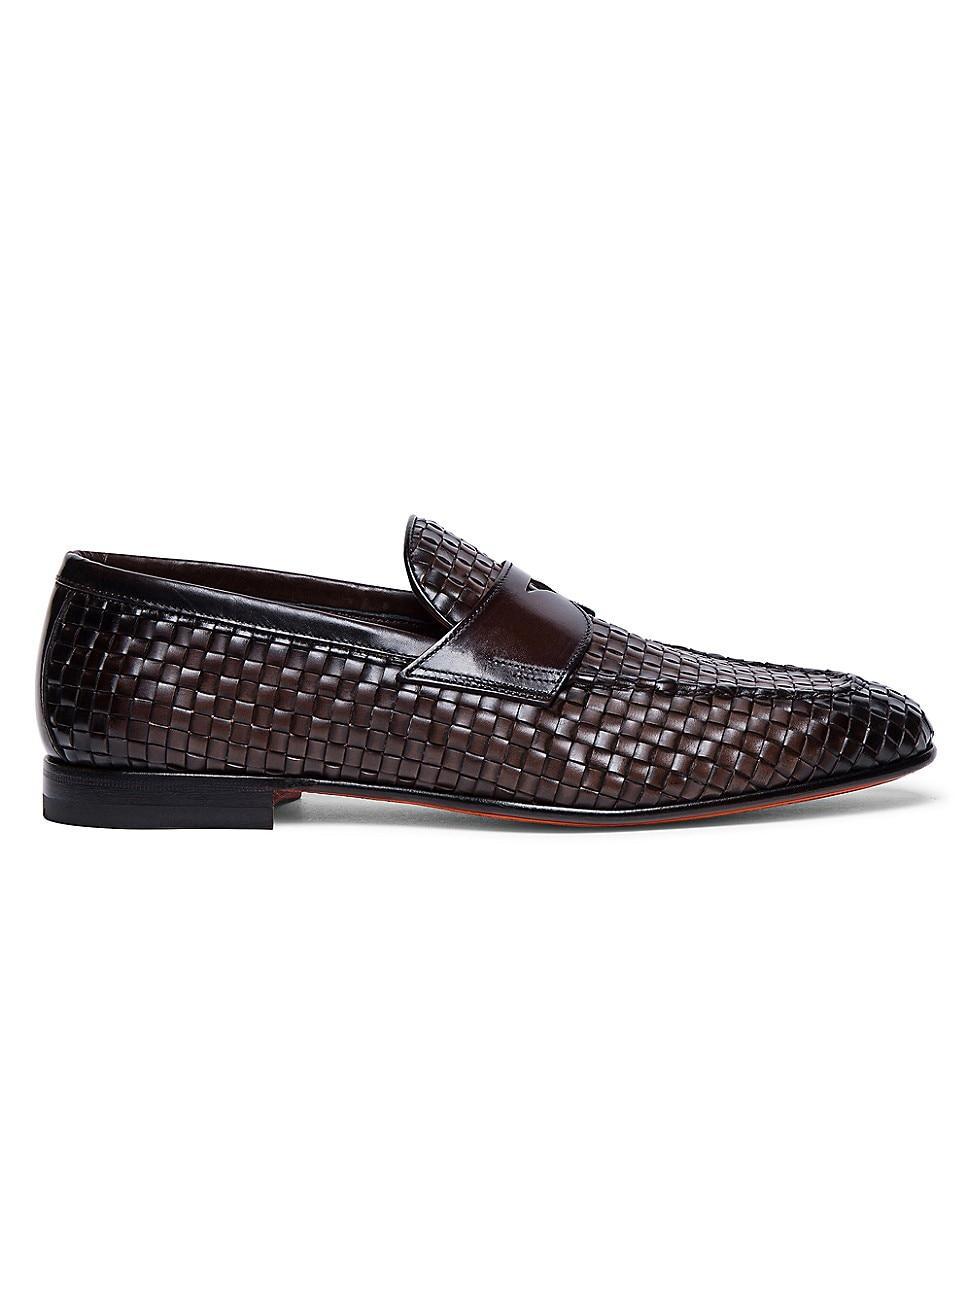 Mens Gwendal Woven Leather Penny Loafers Product Image